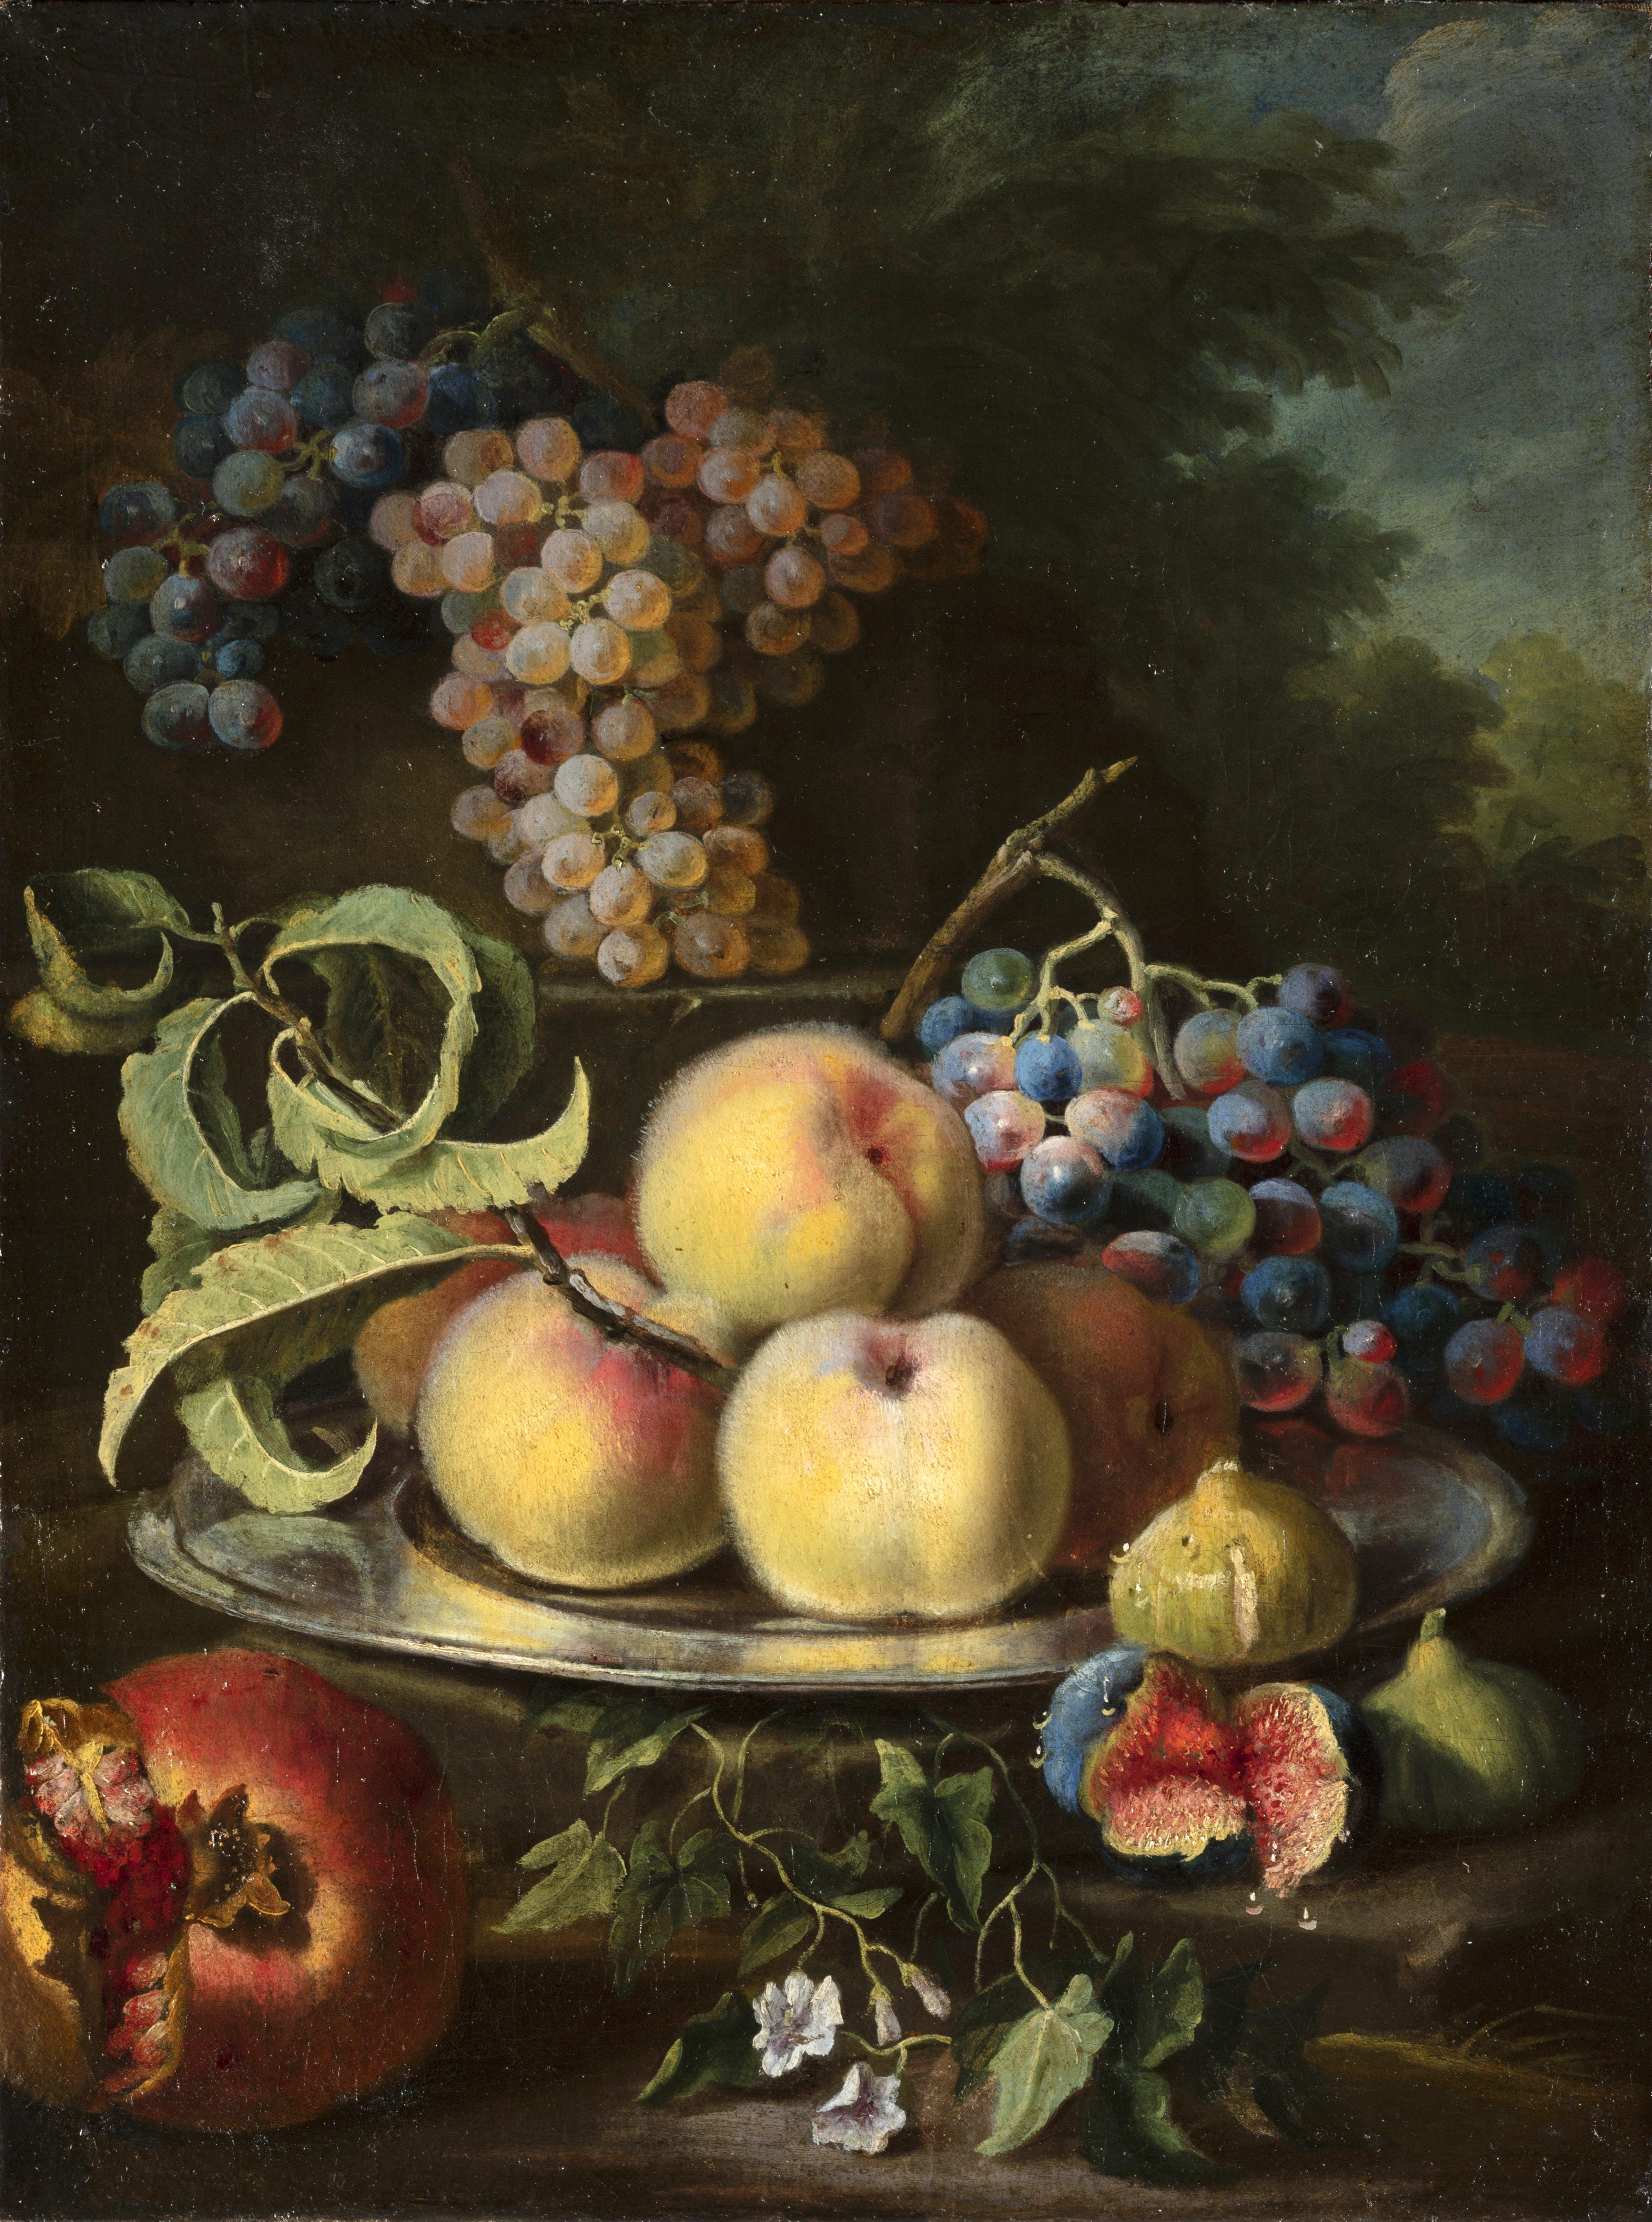 Maximilian Pfeiler (active Rome, circa 1694-circa 1721 Budapest)

Still life with peaches, grapes, figs and pomegranate

Oil on canvas, Measures: cm H 63,5 x W 47. With frame cm H 97,5 x W 85 x W 7,5

The canvas, of fine workmanship,